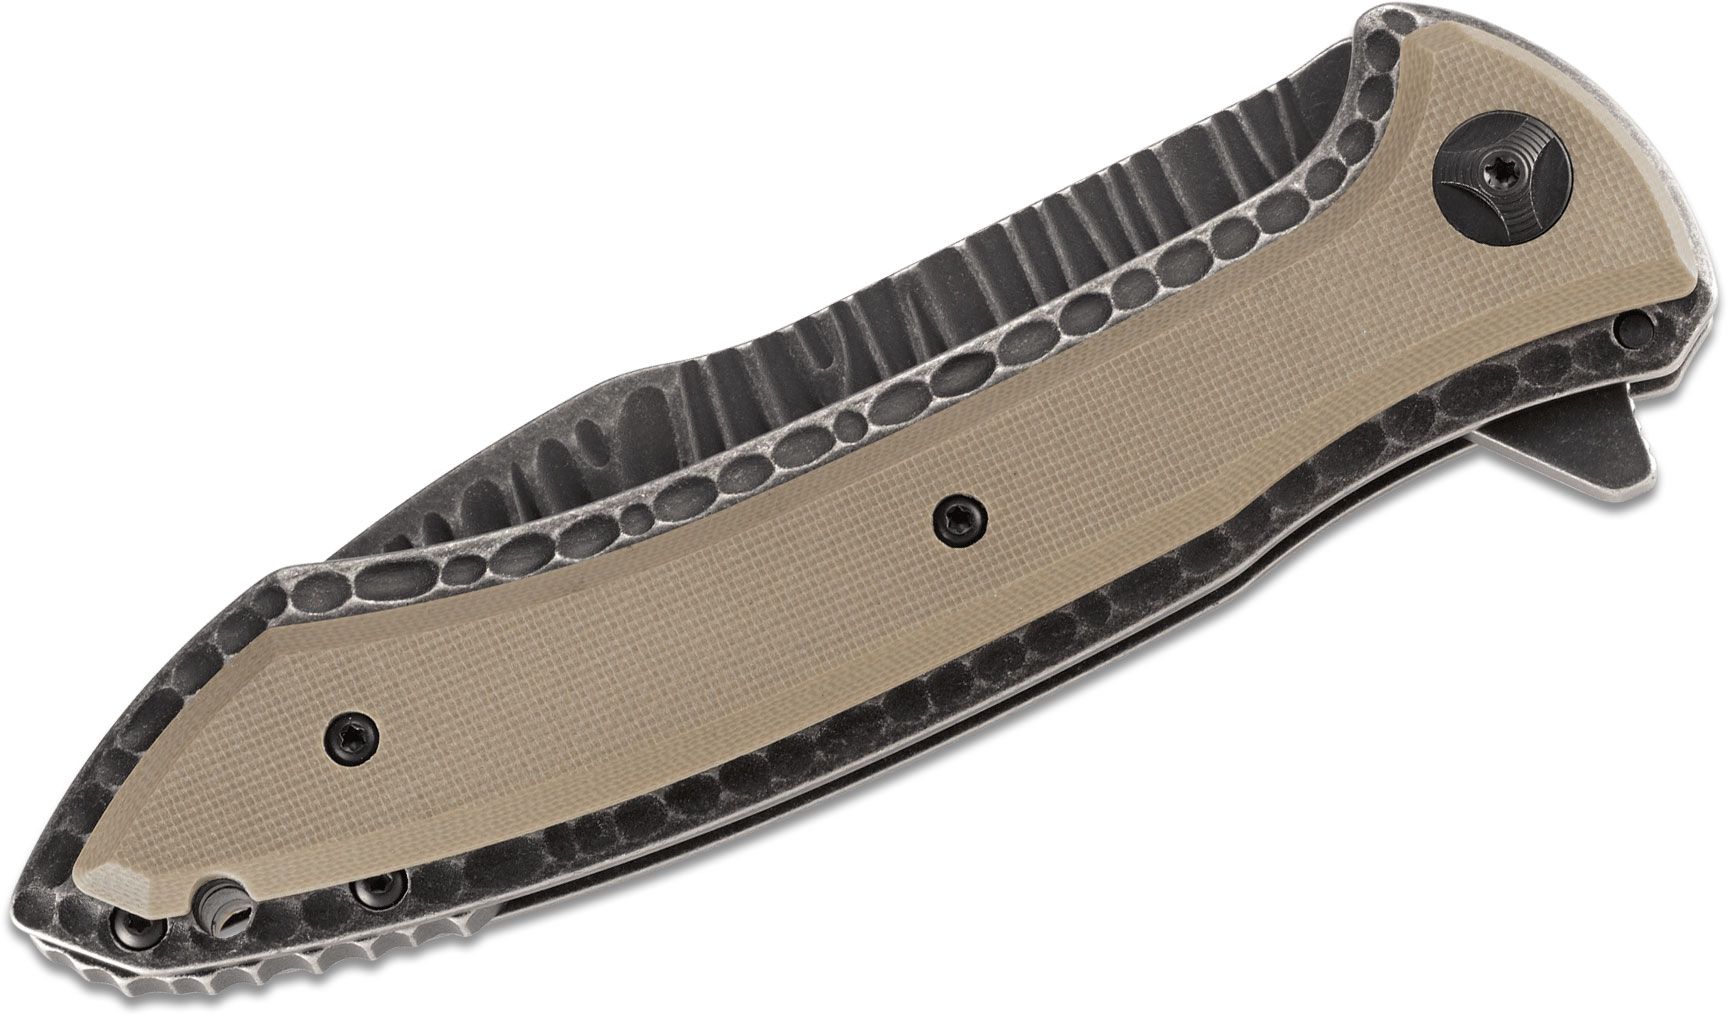 Columbia River CRKT 5381 Eric Ochs APOC Flipper Knife 3.978 Black  Stonewashed Combo Blade with Veff Serrations, Desert Tan G10 and Stainless  Steel Handles - KnifeCenter - Discontinued